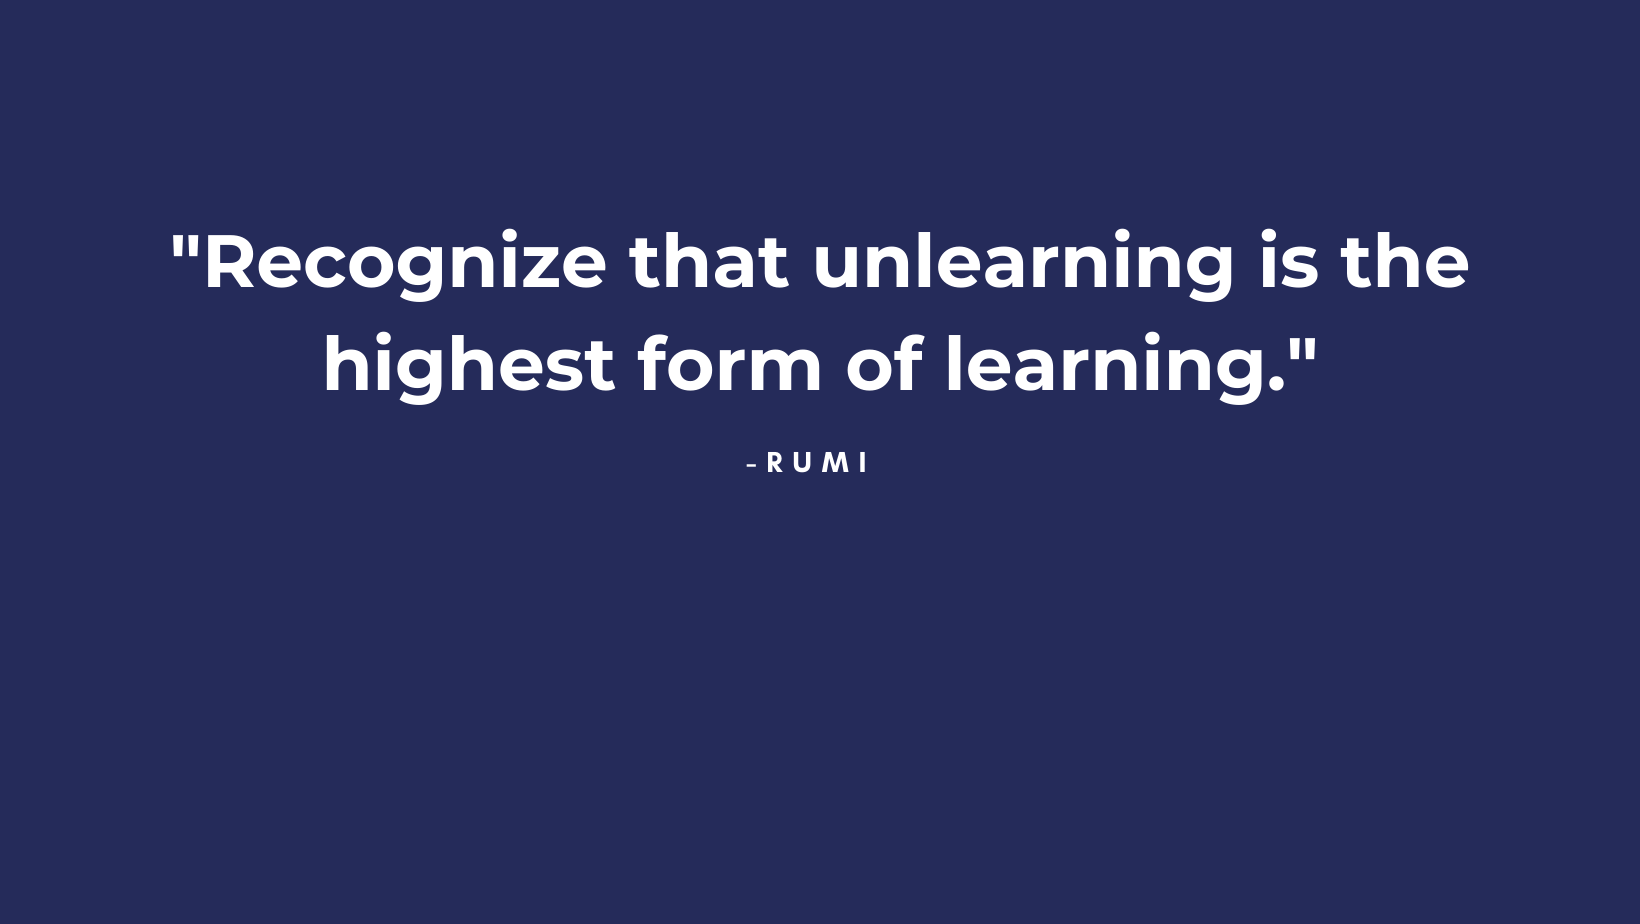 Quote that reads "Recognize that unlearning is the highest form of learning."